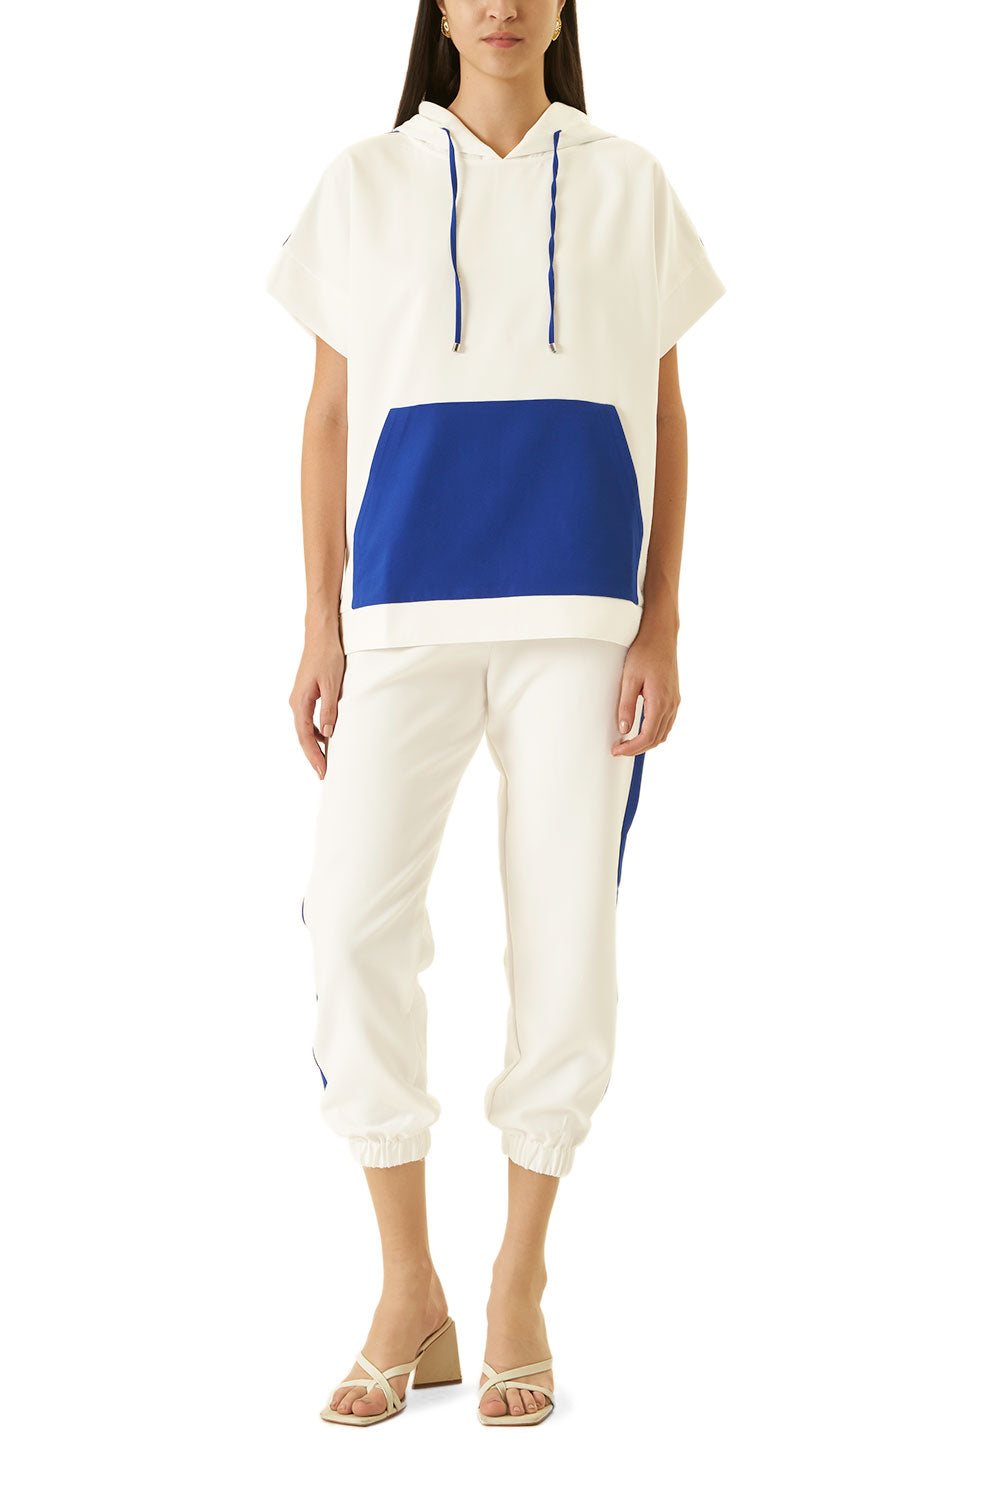 White and Royal Blue Milan Track Suit